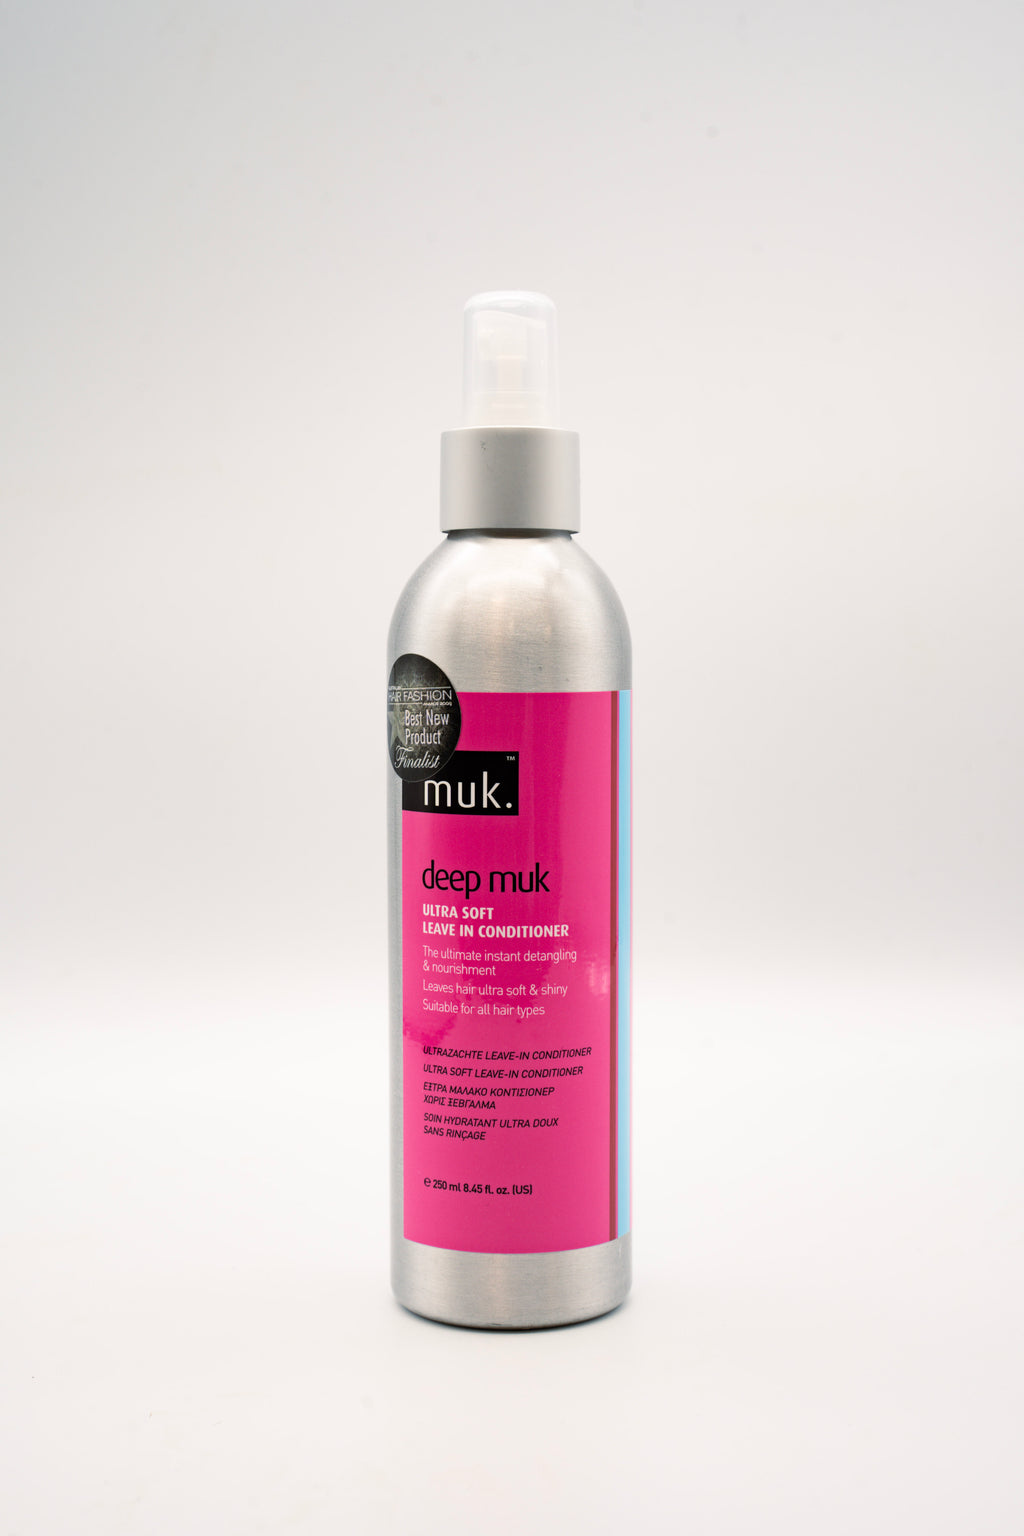 muk. deep muk ULTRA SOFT LEAVE IN CONDITIONER